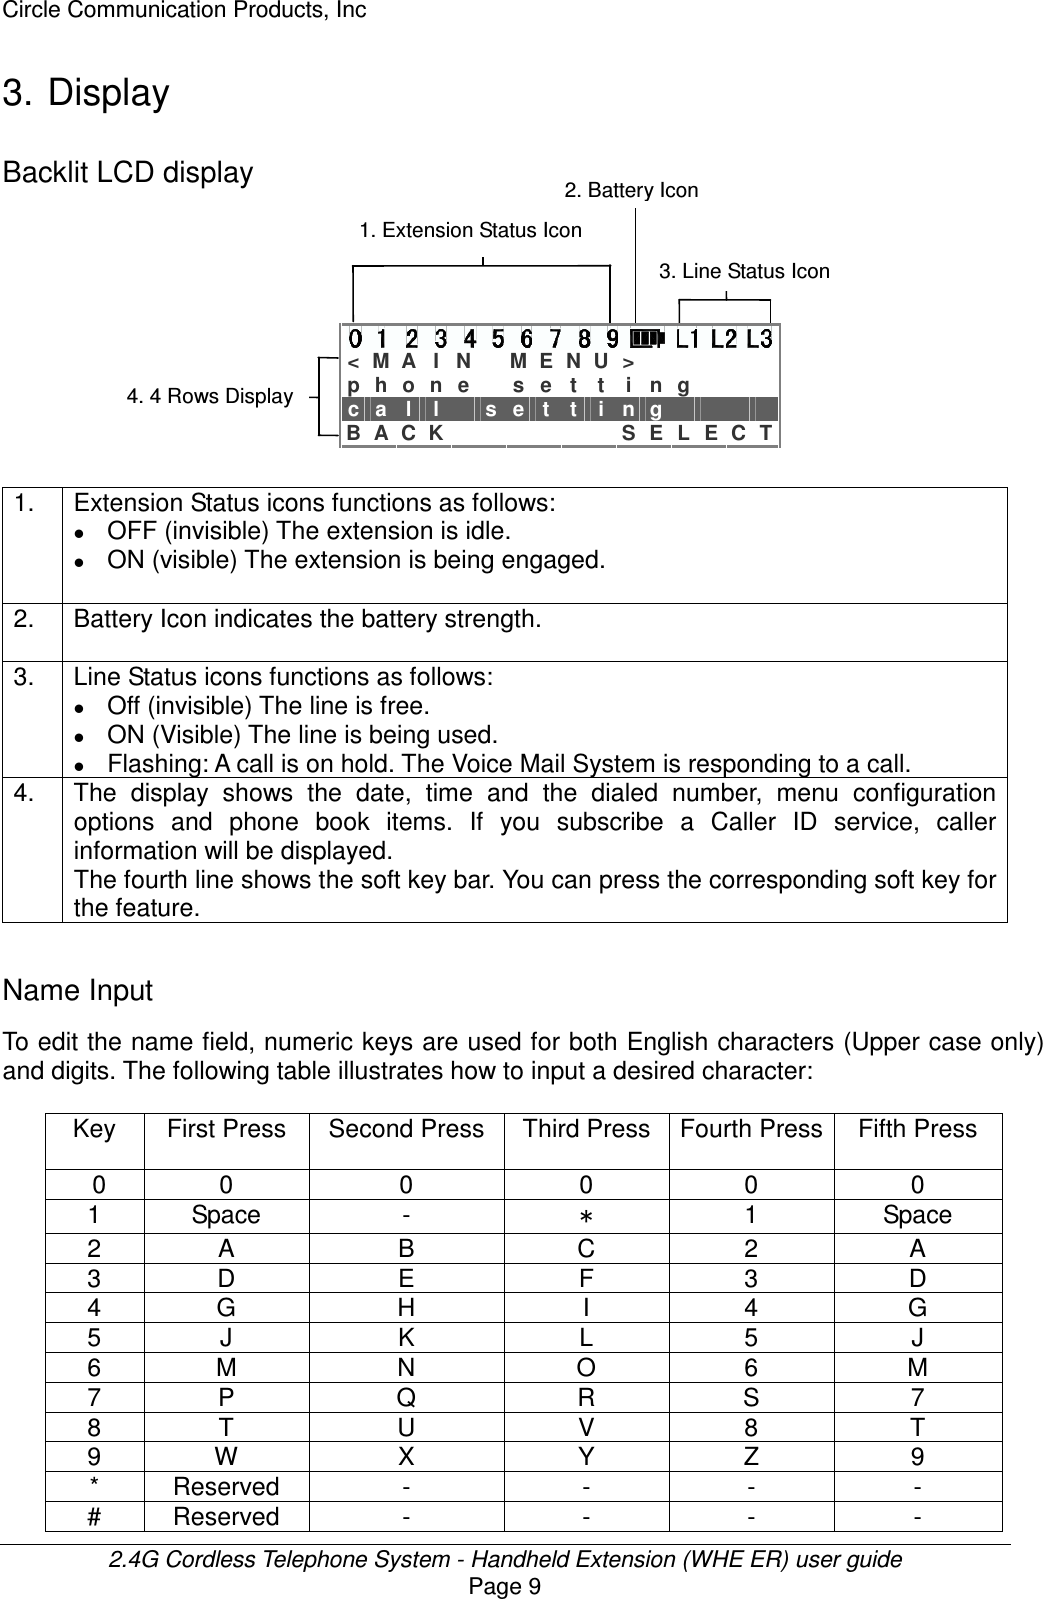 Circle Communication Products, Inc  2.4G Cordless Telephone System - Handheld Extension (WHE ER) user guide Page 9 2. Battery Icon 3. Line Status Icon 1. Extension Status Icon 4. 4 Rows Display &lt; M A I N  M E N U &gt;      p h o n e  s e t t i n g    c a l l  s e t t i n g     B A C K       S E L E C T 3. Display Backlit LCD display           1.  Extension Status icons functions as follows:  OFF (invisible) The extension is idle.  ON (visible) The extension is being engaged.  2.  Battery Icon indicates the battery strength.  3.  Line Status icons functions as follows:  Off (invisible) The line is free.  ON (Visible) The line is being used.  Flashing: A call is on hold. The Voice Mail System is responding to a call. 4.  The  display  shows  the  date,  time  and  the  dialed  number,  menu  configuration options  and  phone  book  items.  If  you  subscribe  a  Caller  ID  service,  caller information will be displayed.   The fourth line shows the soft key bar. You can press the corresponding soft key for the feature.  Name Input To edit the name field, numeric keys are used for both English characters (Upper case only) and digits. The following table illustrates how to input a desired character:  Key  First Press  Second Press  Third Press Fourth Press Fifth Press 0  0  0  0  0  0 1  Space  -   1  Space 2  A  B  C  2  A 3  D  E  F  3  D 4  G  H  I  4  G 5  J  K  L  5  J 6  M  N  O  6  M 7  P  Q  R  S  7 8  T  U  V  8  T 9  W  X  Y  Z  9 *  Reserved  -  -  -  - #  Reserved  -  -  -  - 